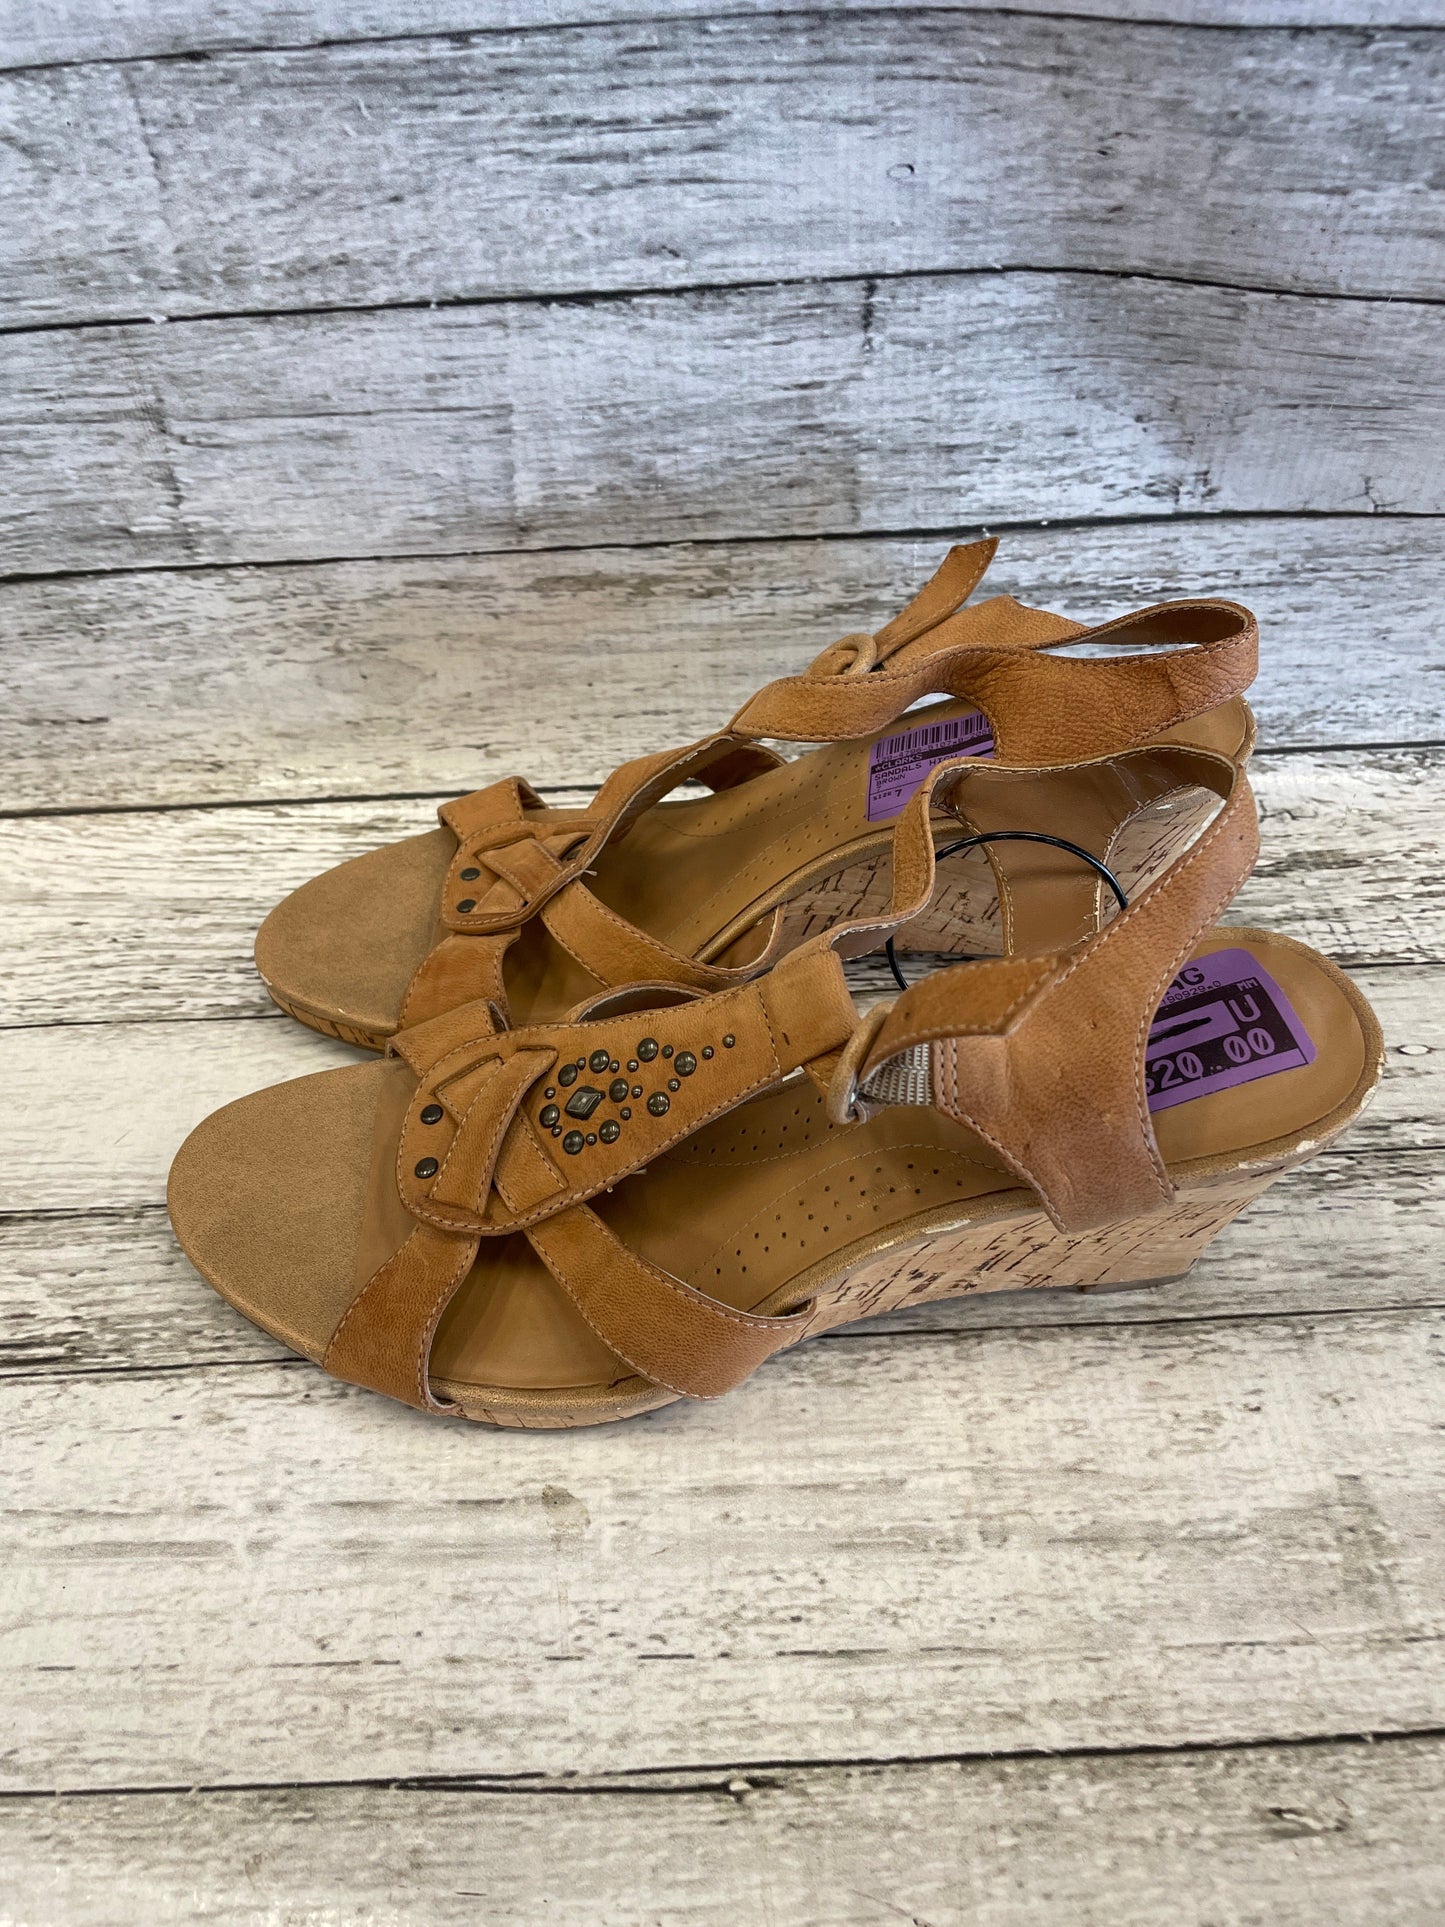 Sandals High By Clarks  Size: 7